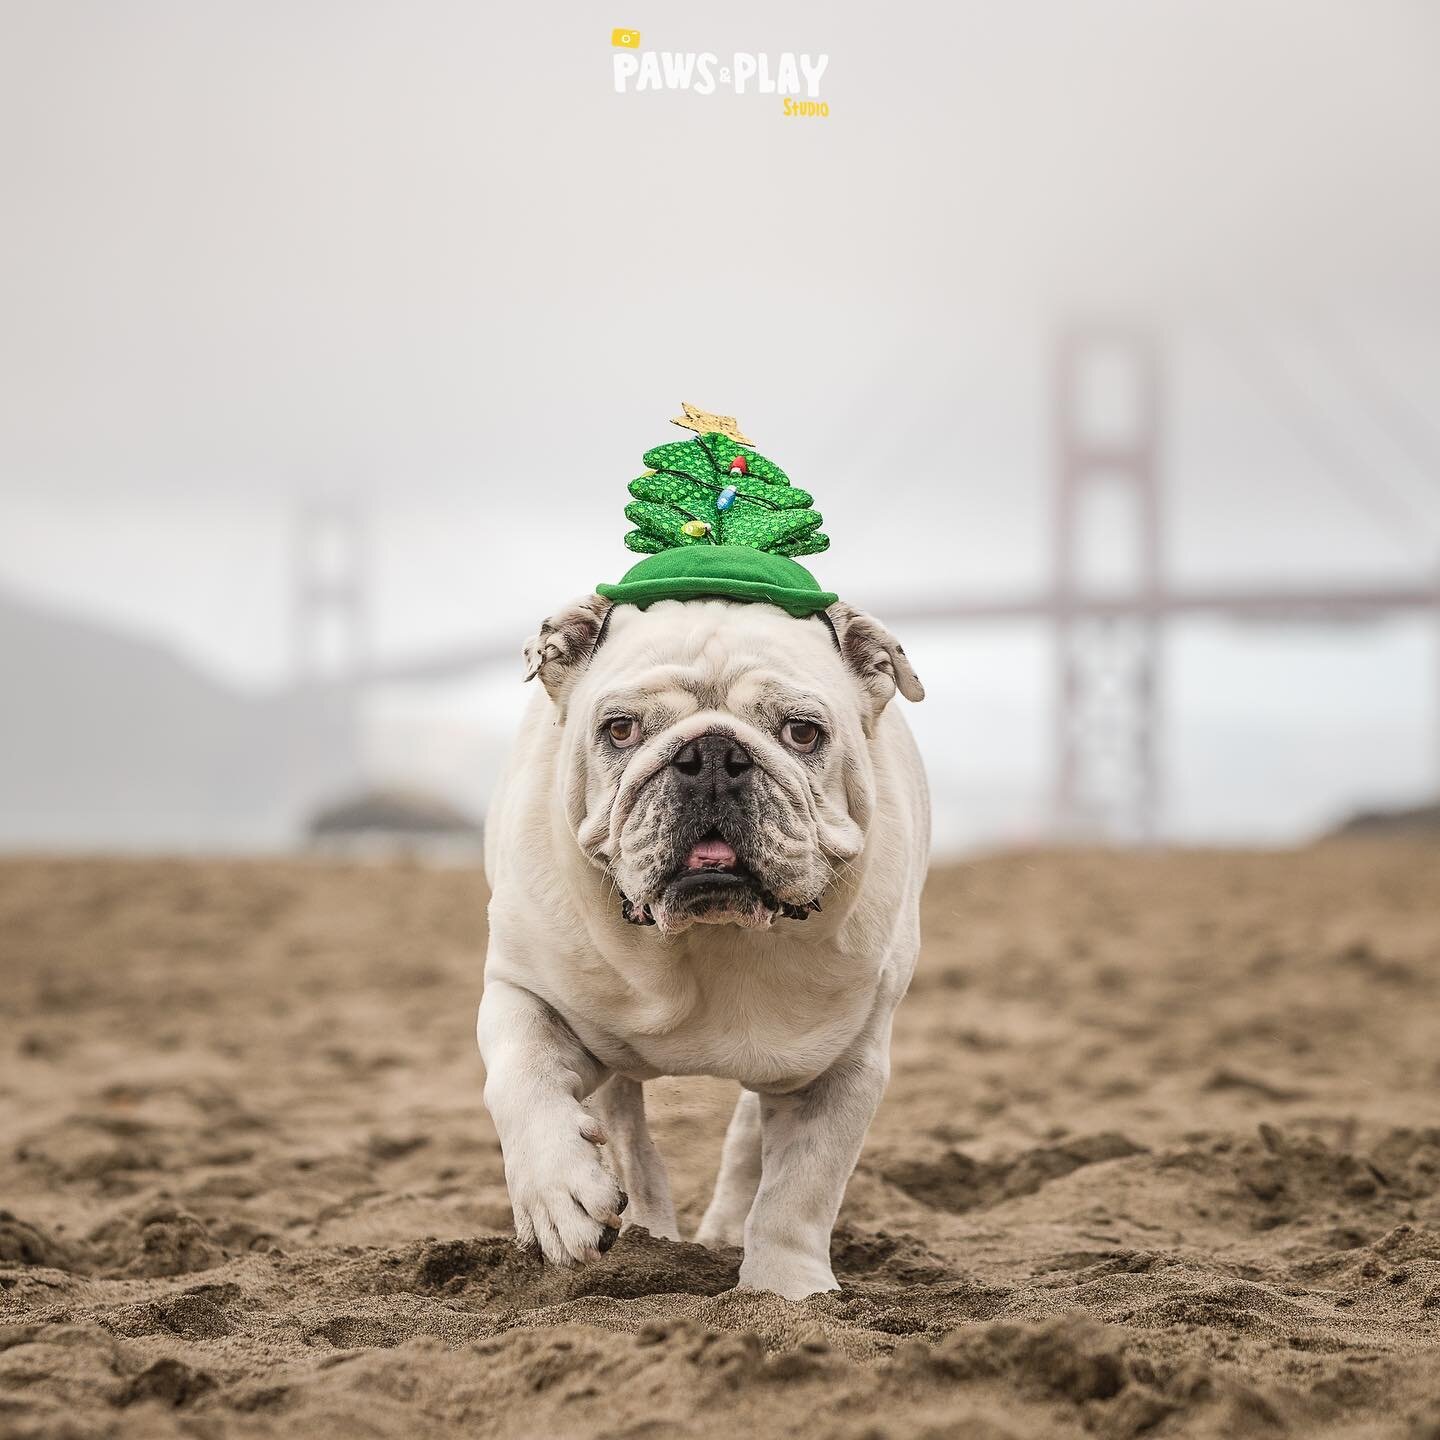 Merry Christmas to all the furry friends and their pawrents! We wish everyone a wonderful holiday season, stay healthy and safe, feast well, laugh a lot, and see you in 2022! 🎄🥳💋

PS. Winston is our Mr. December for @lovesecondchances 2022 calenda